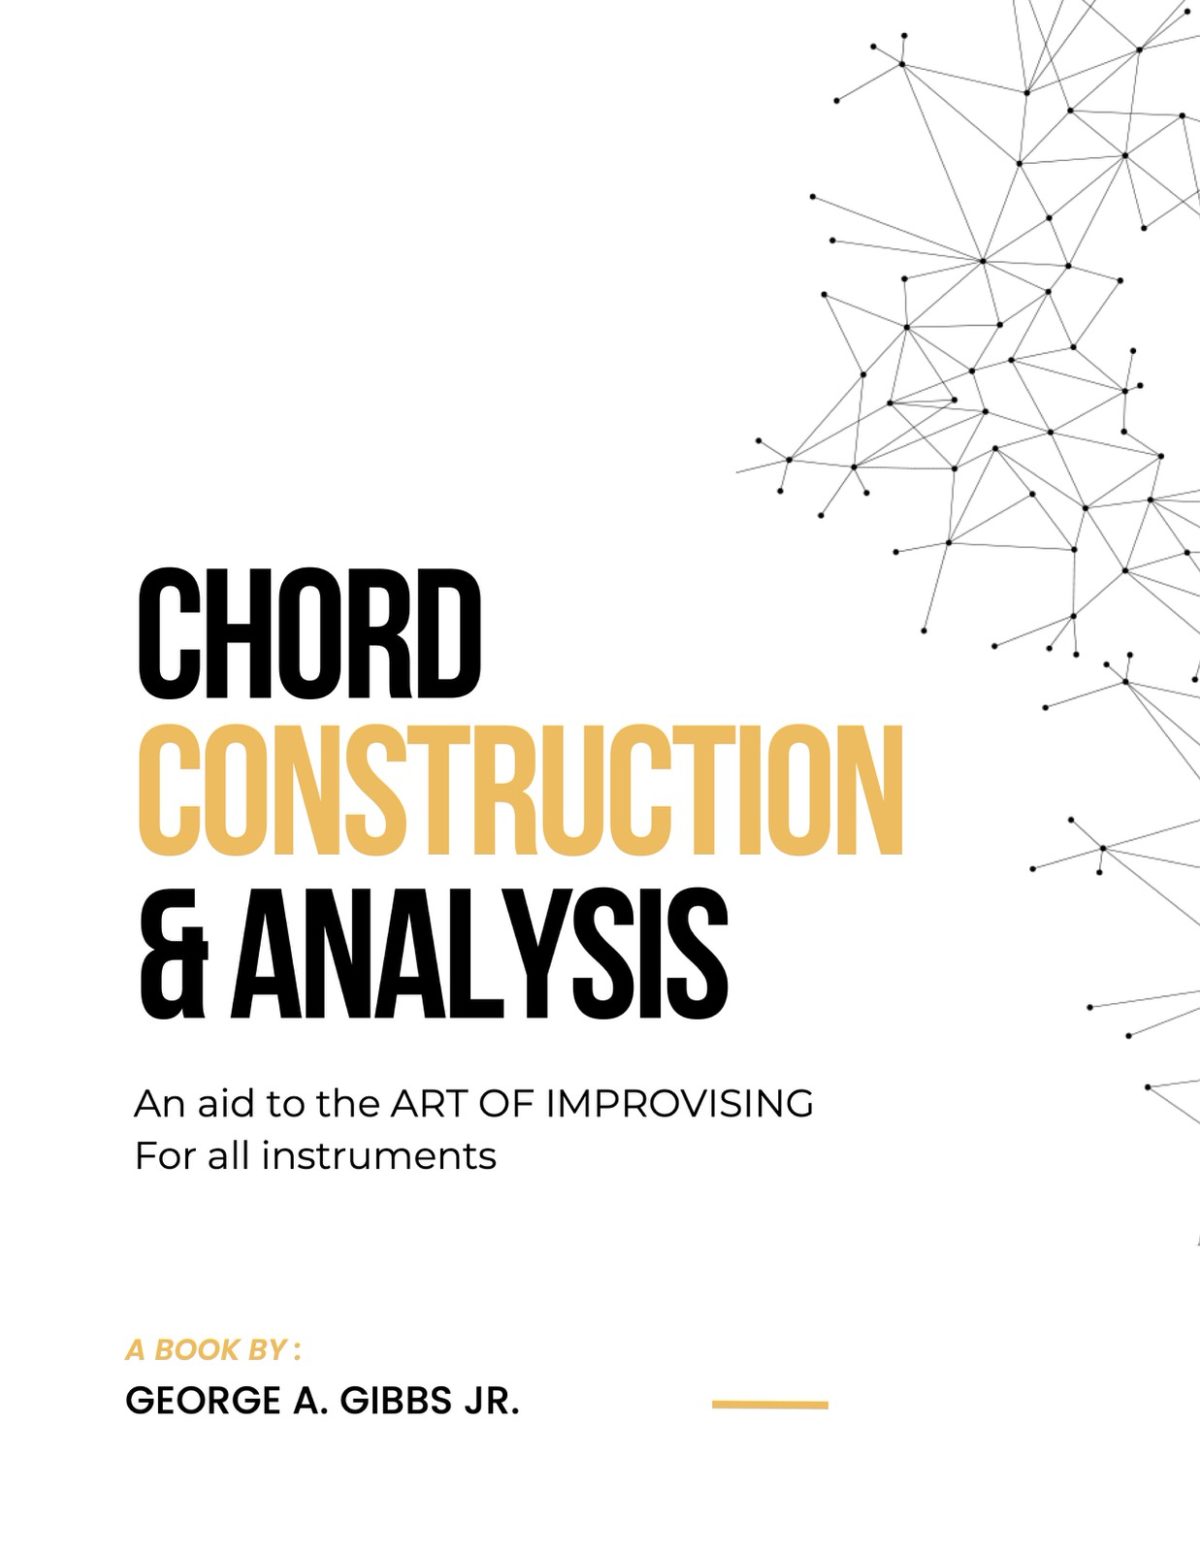 Gibbs, Chord Construction and Analysis